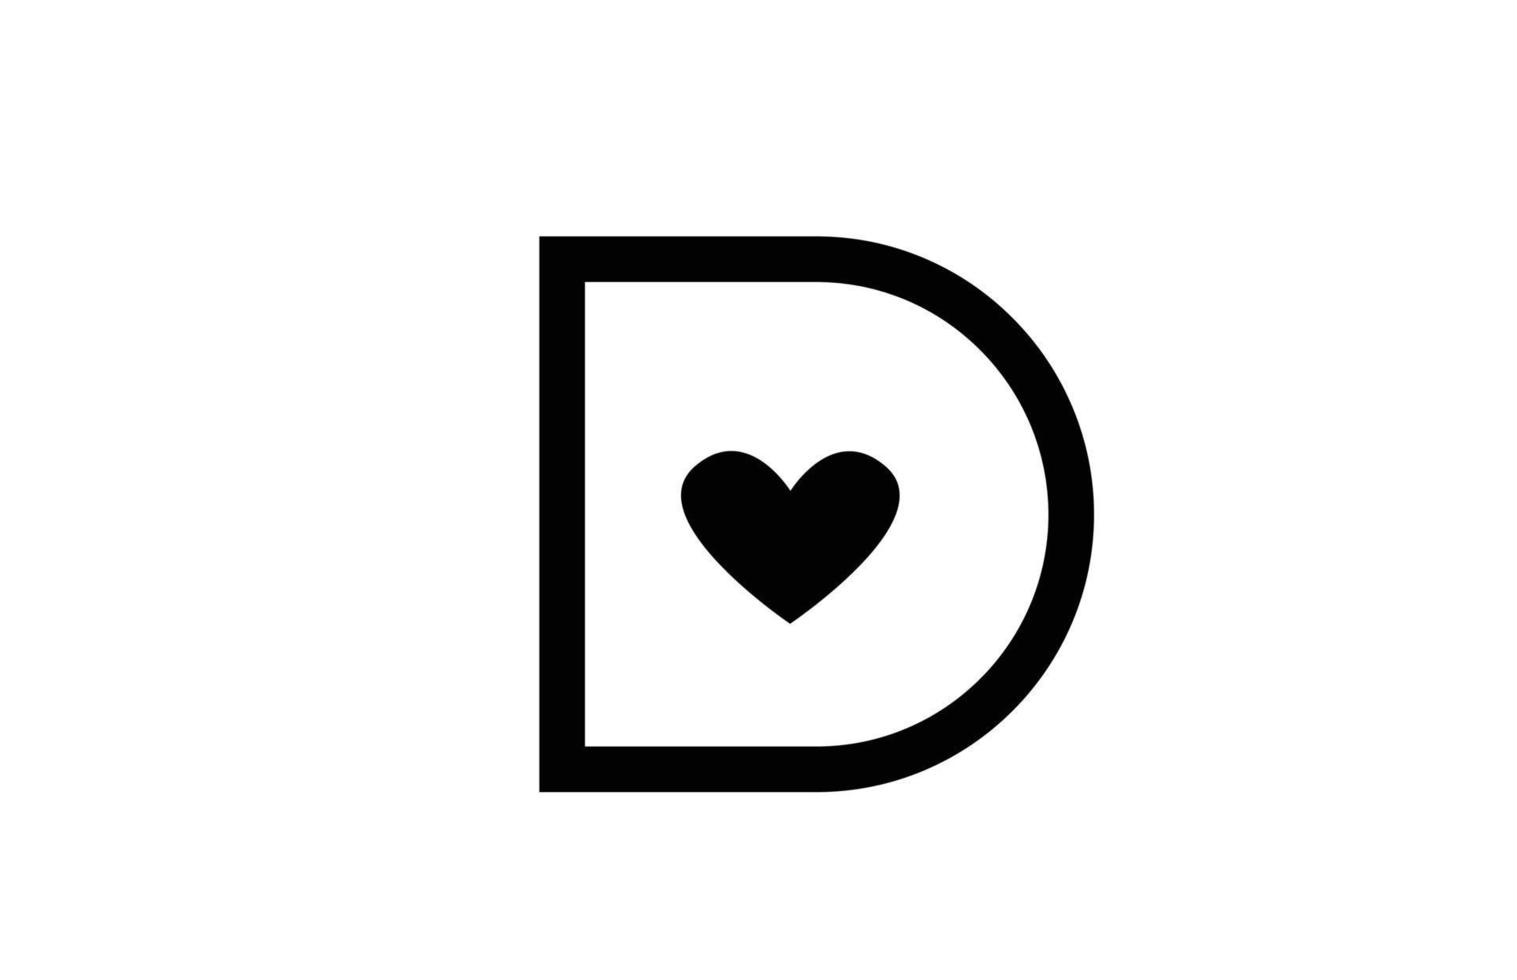 d love heart alphabet letter icon logo with black and white color and line creative design for company or business vector